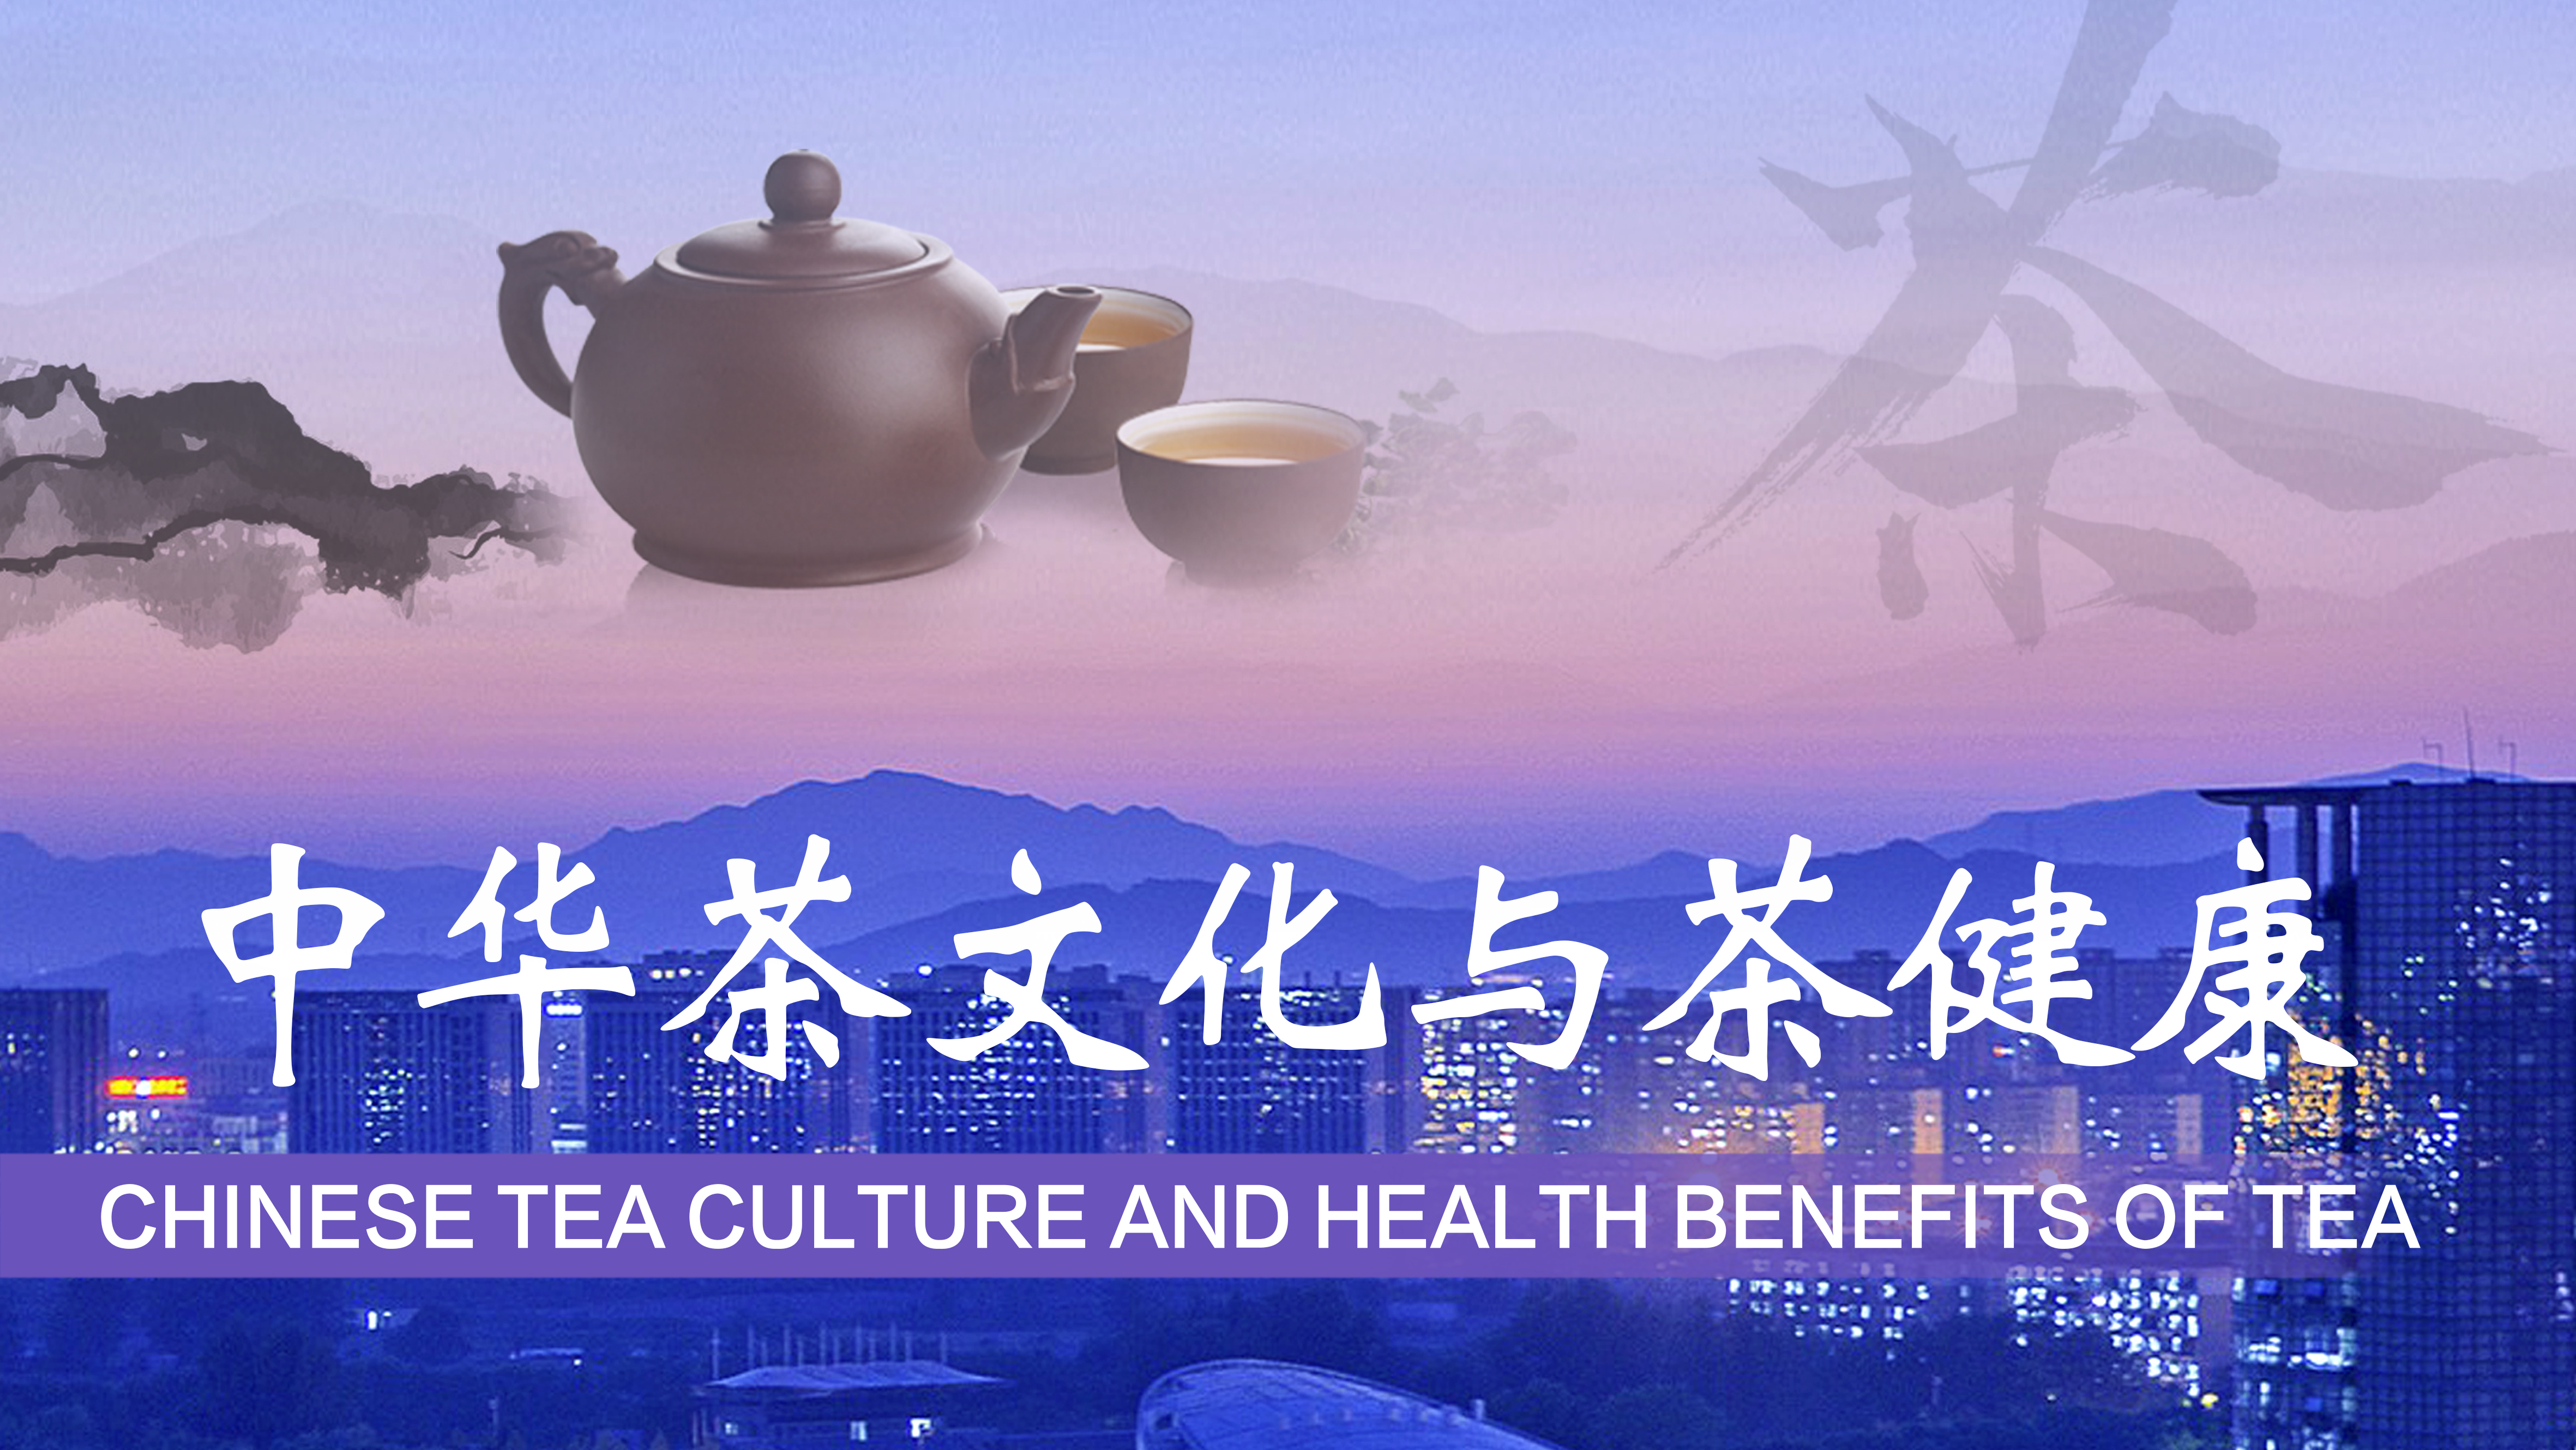 Chinese tea culture and health benefits of tea